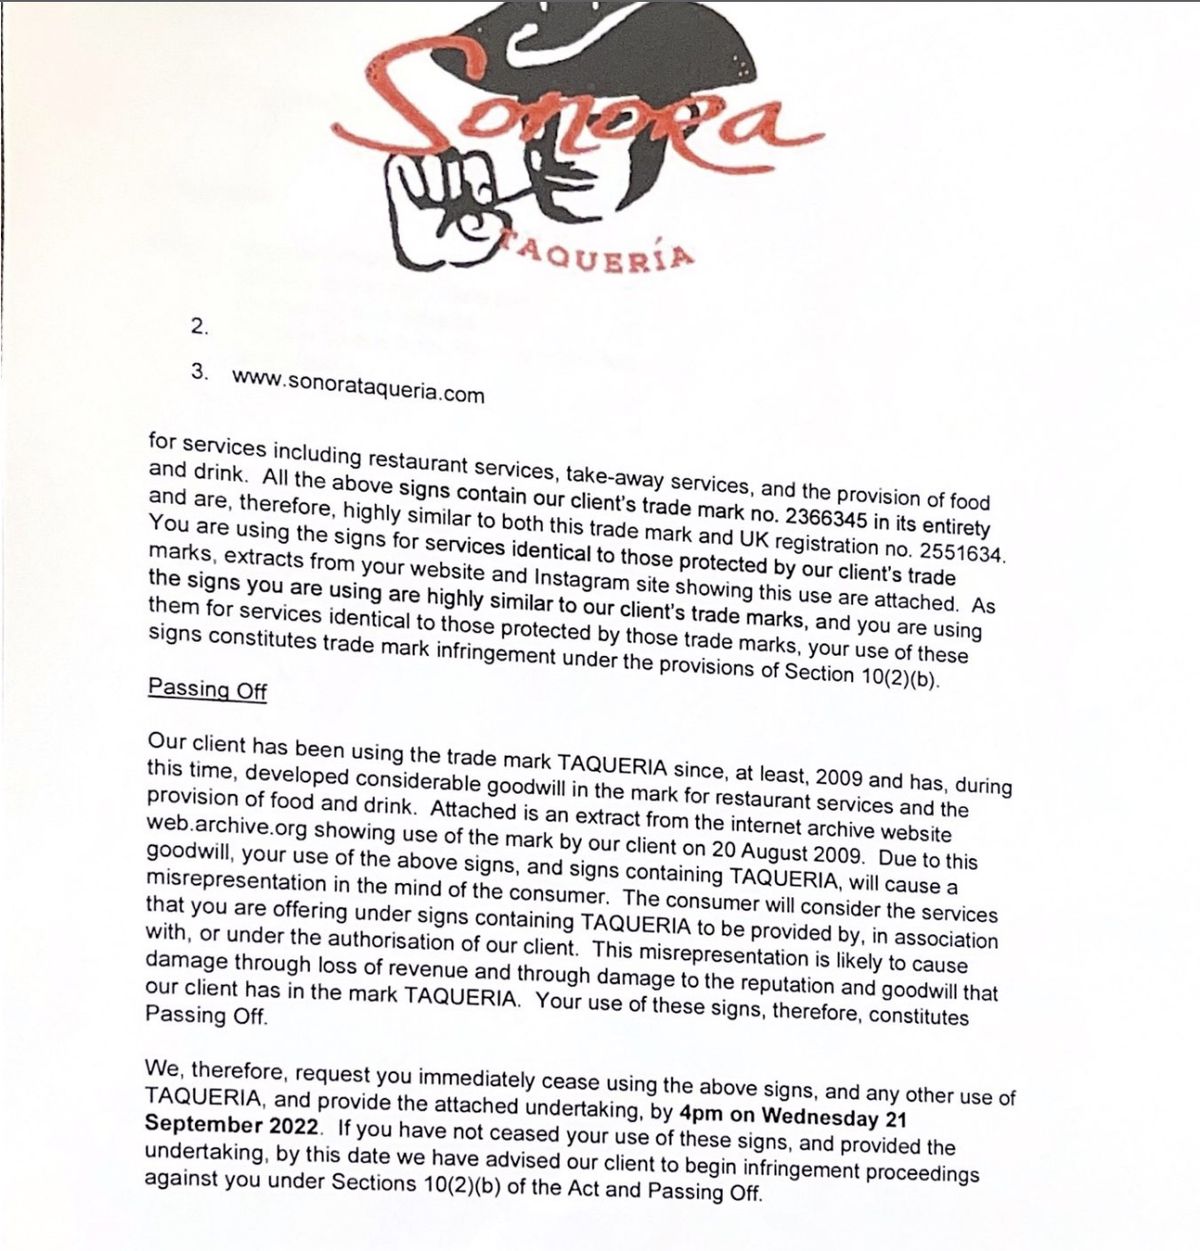 A scan of a legal letter detailing alleged copyright infringement of the trademark Taquria.